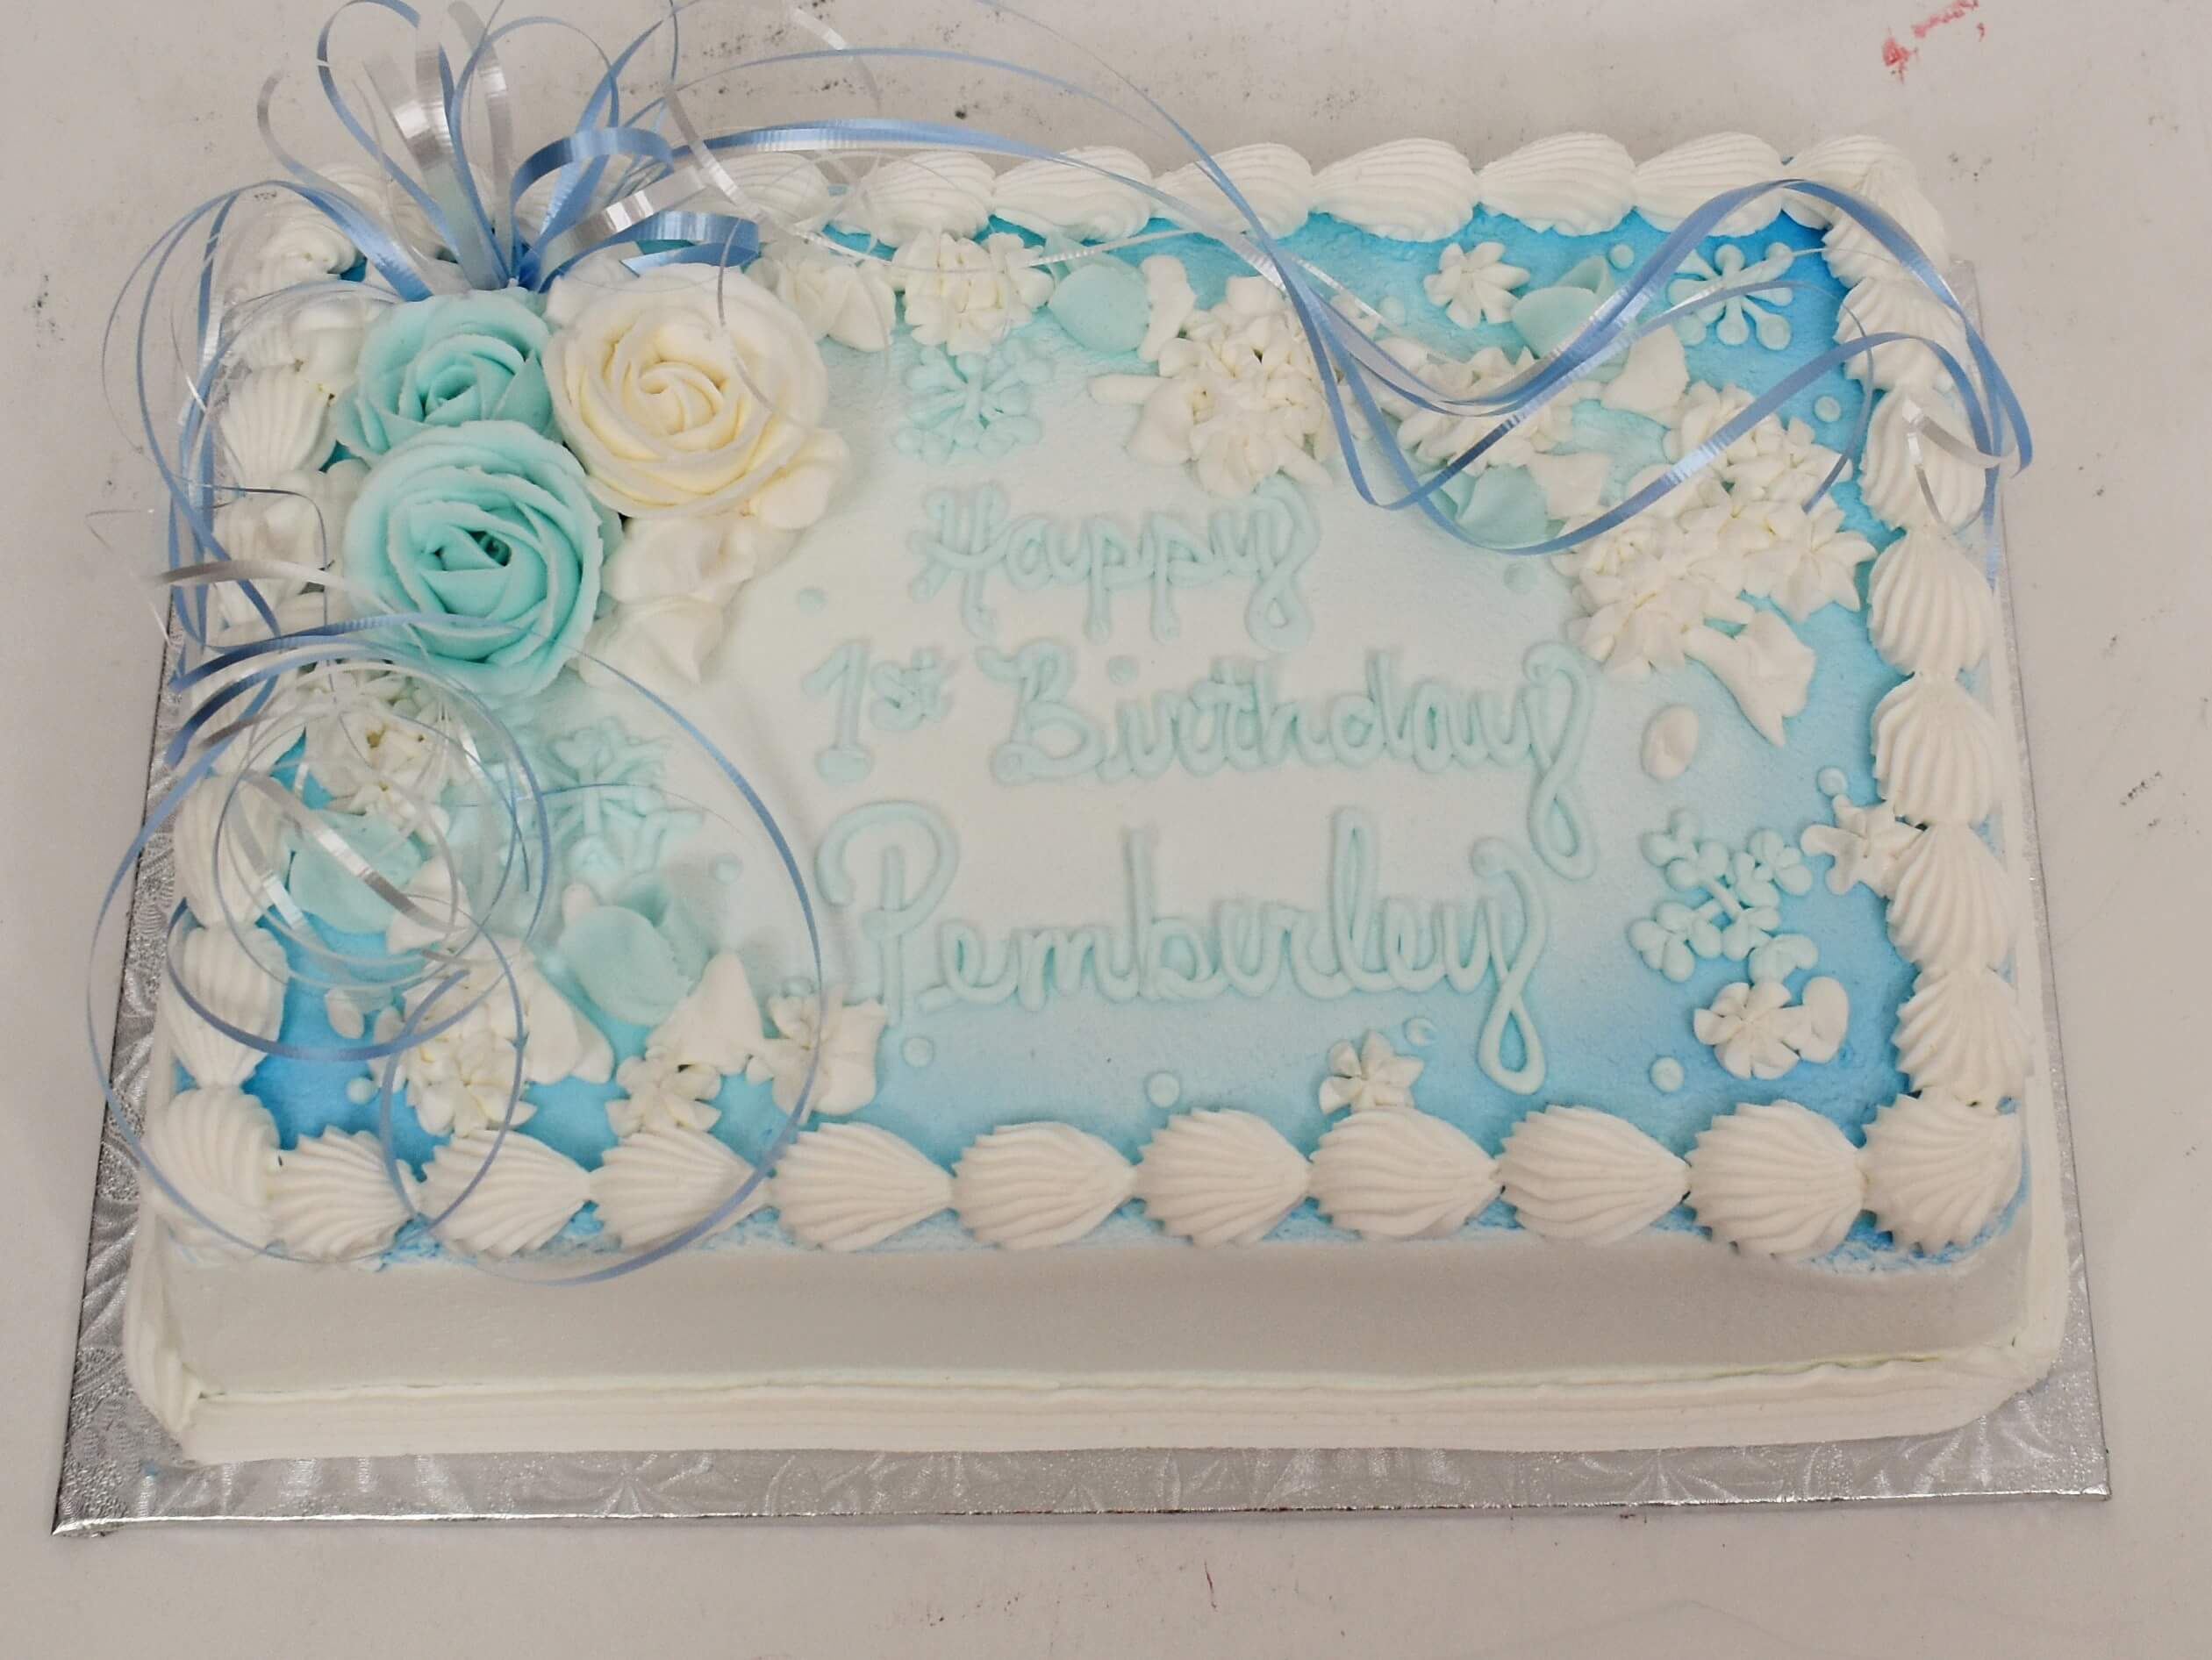 McArthur's Bakery Custom Cake With Light Blue And Pale Yellow Roses